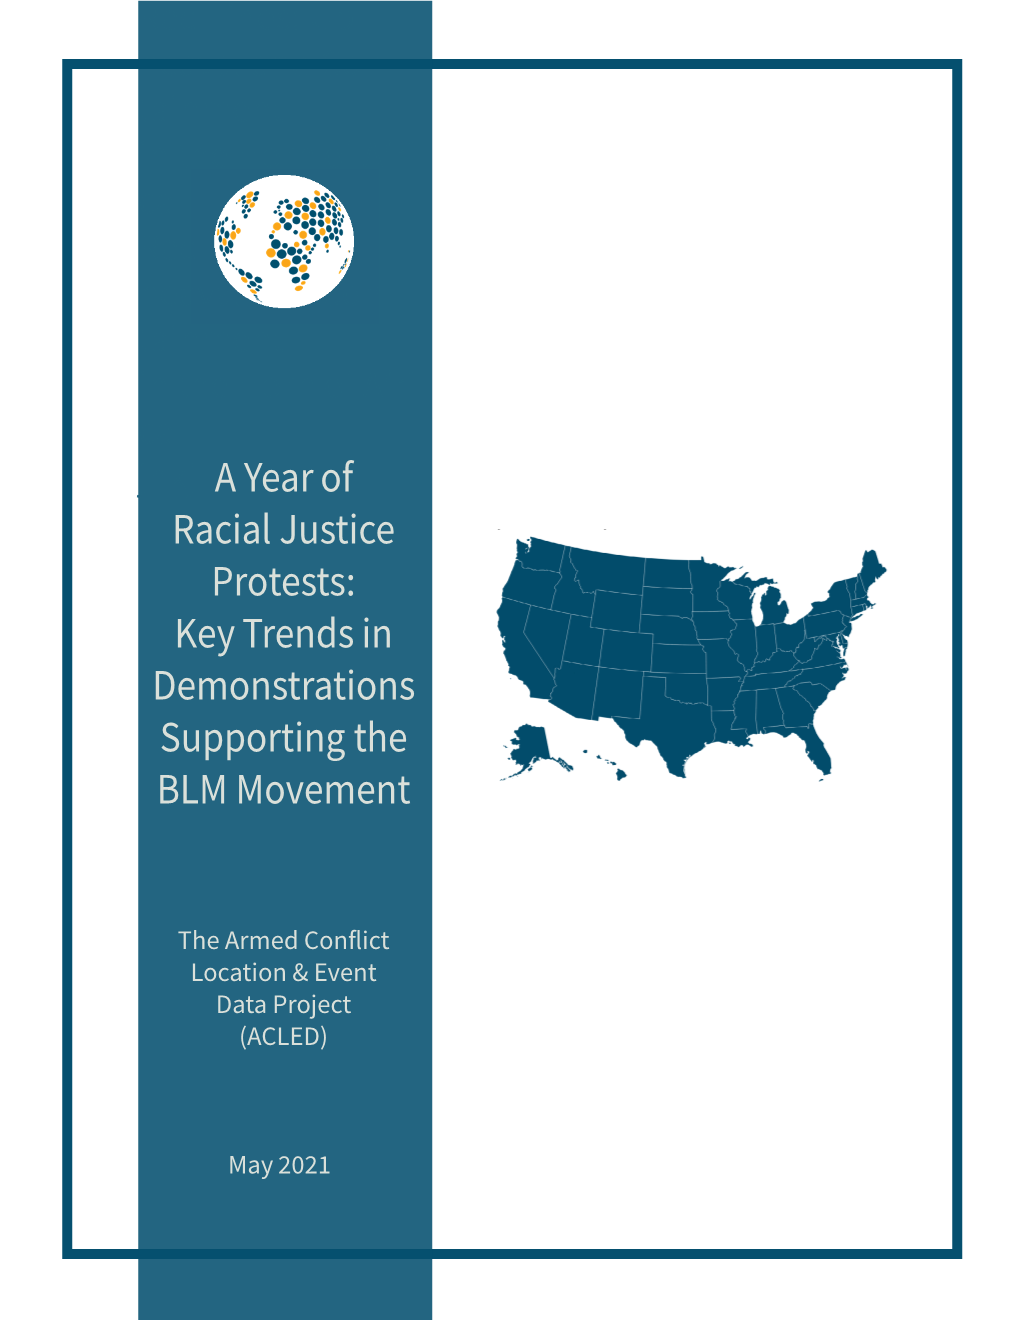 Jhkj a Year of Racial Justice Protests: Key Trends in Demonstrations Supporting the BLM Movement